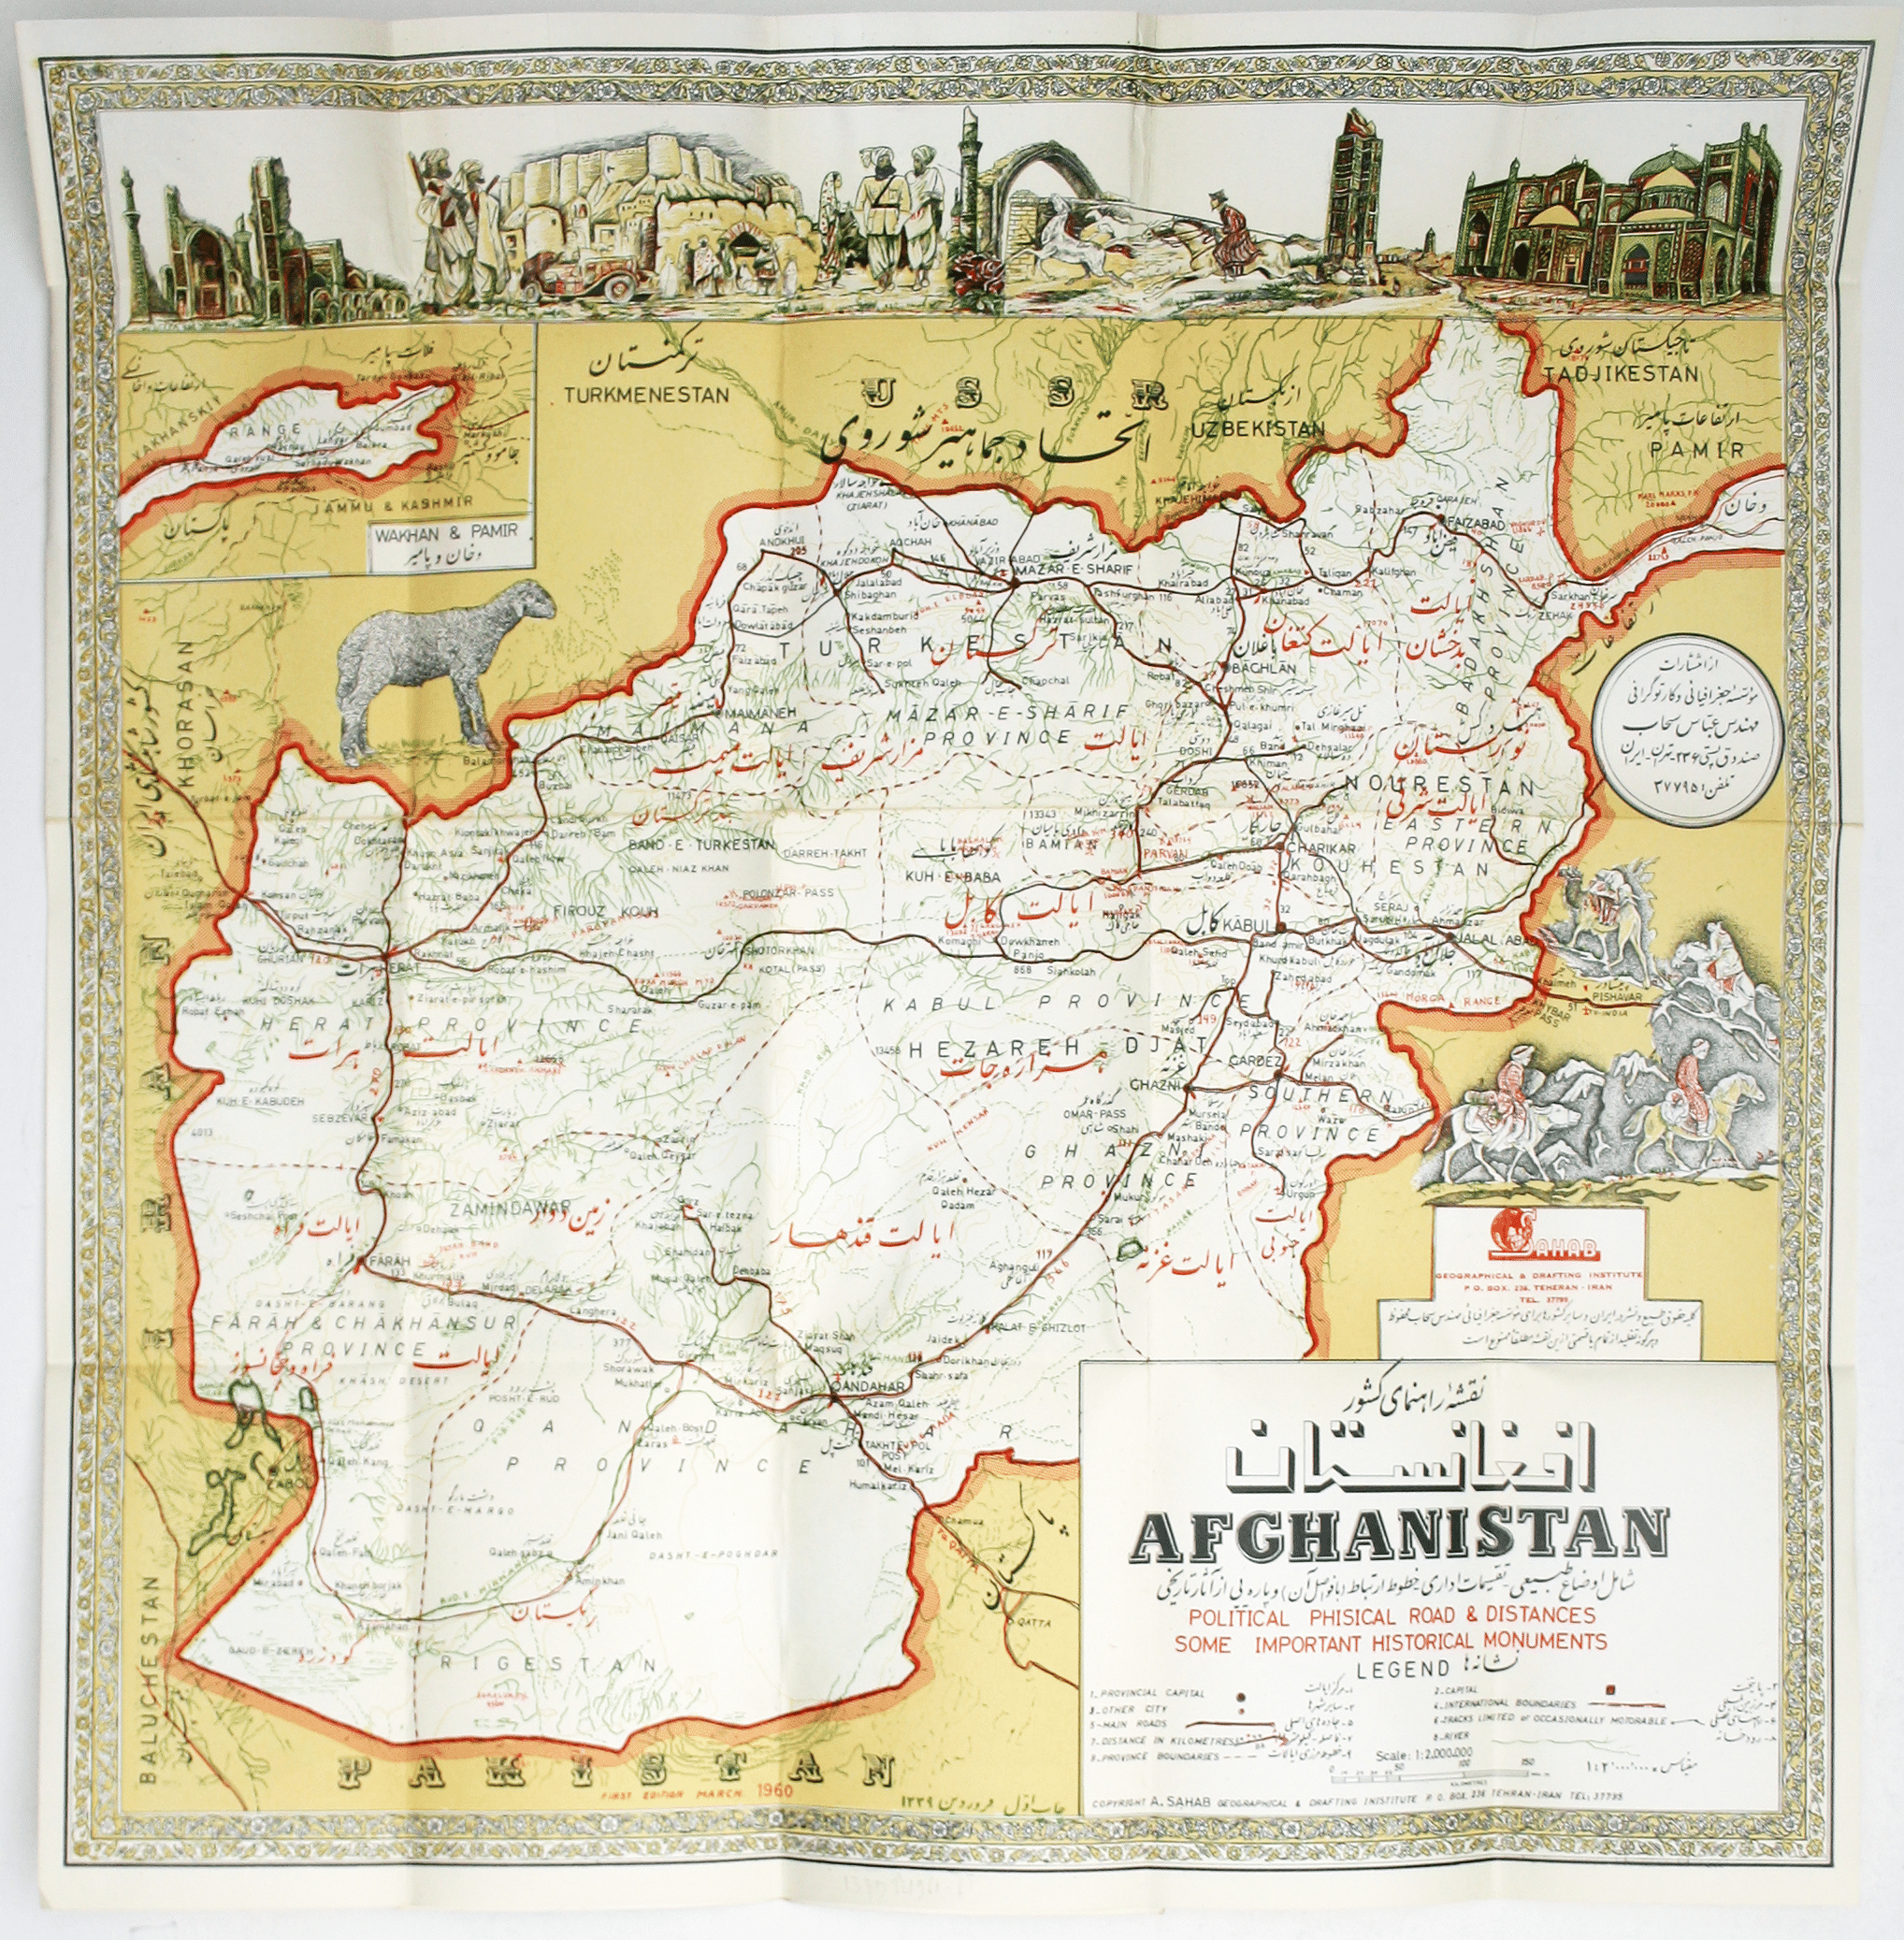 Sahab’s Map of Afghanistan: First Edition